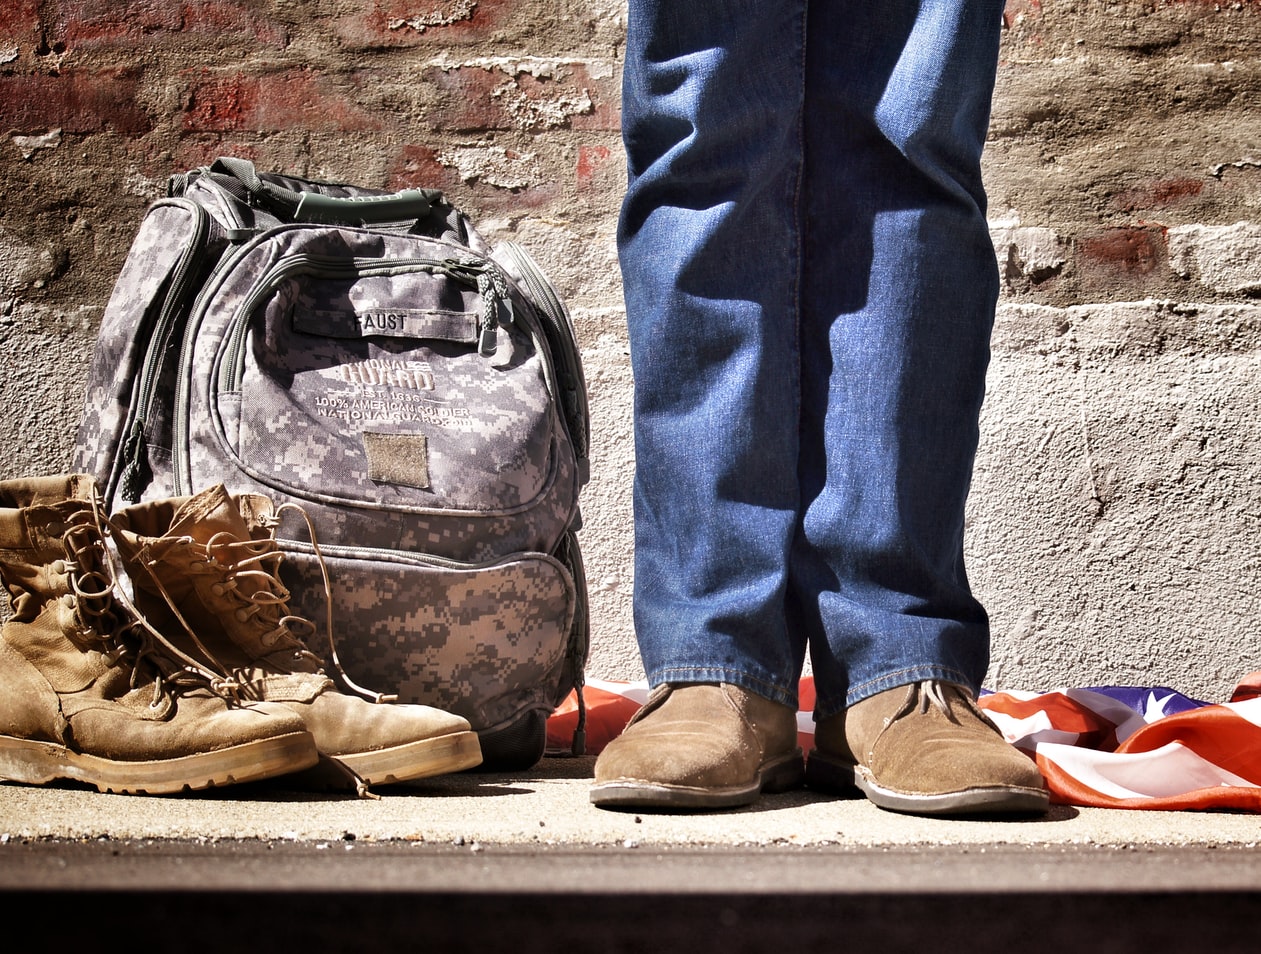 A veteran standing next to his military gear. It is not uncommon for veterans to suffer from substance abuse